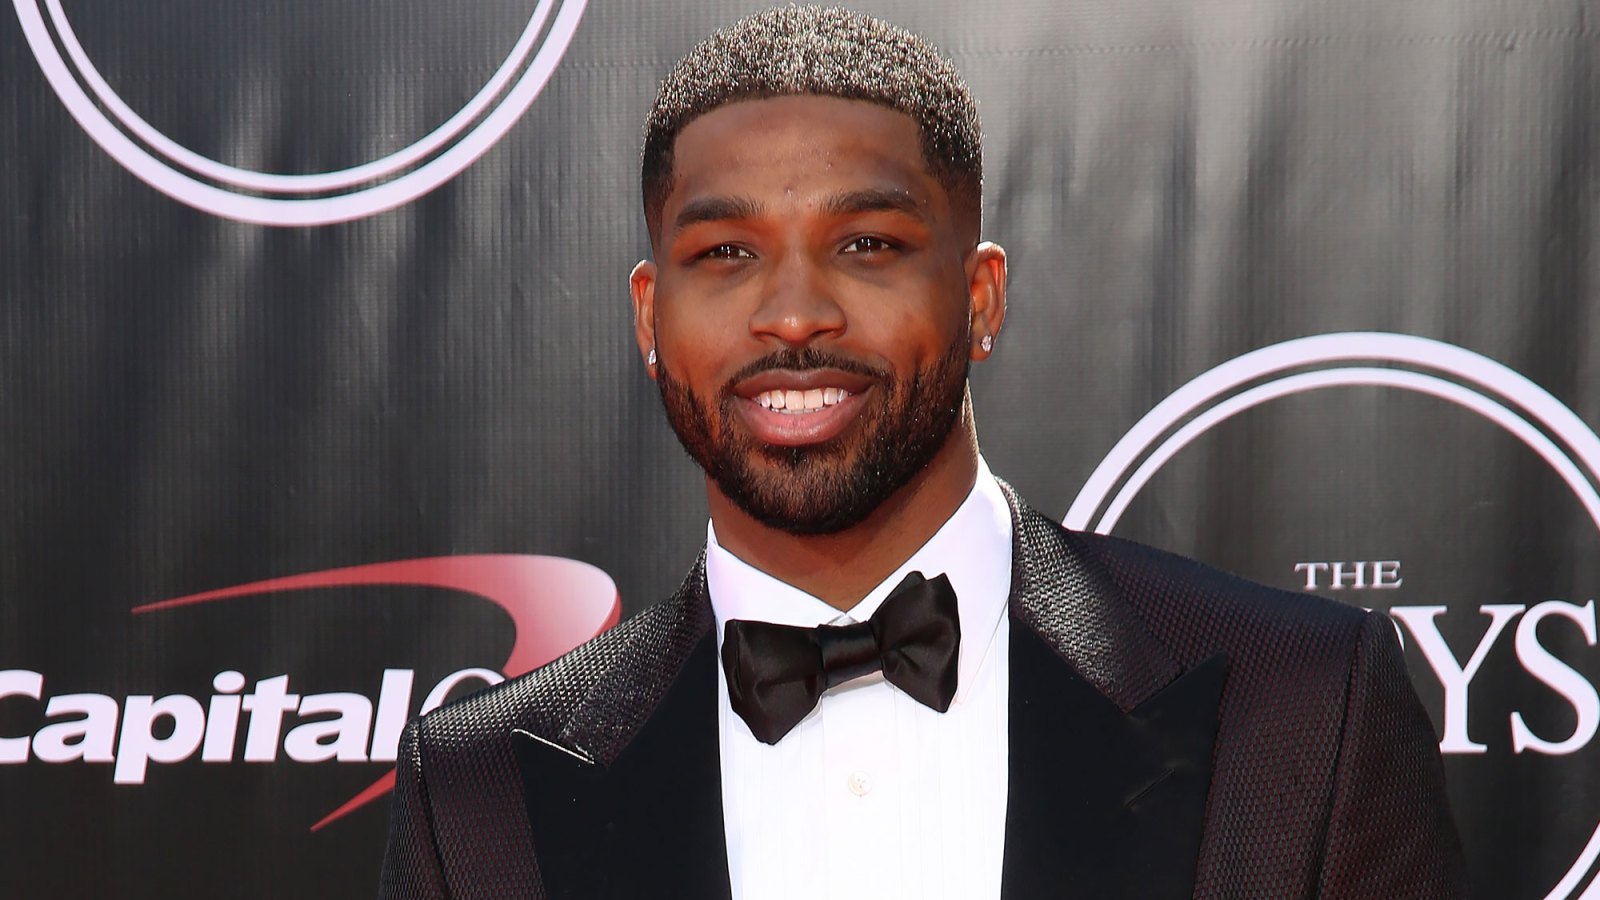 Tristan Thompson Fan Thrown Out of NBA Game Over Alleged Kardashian Digs